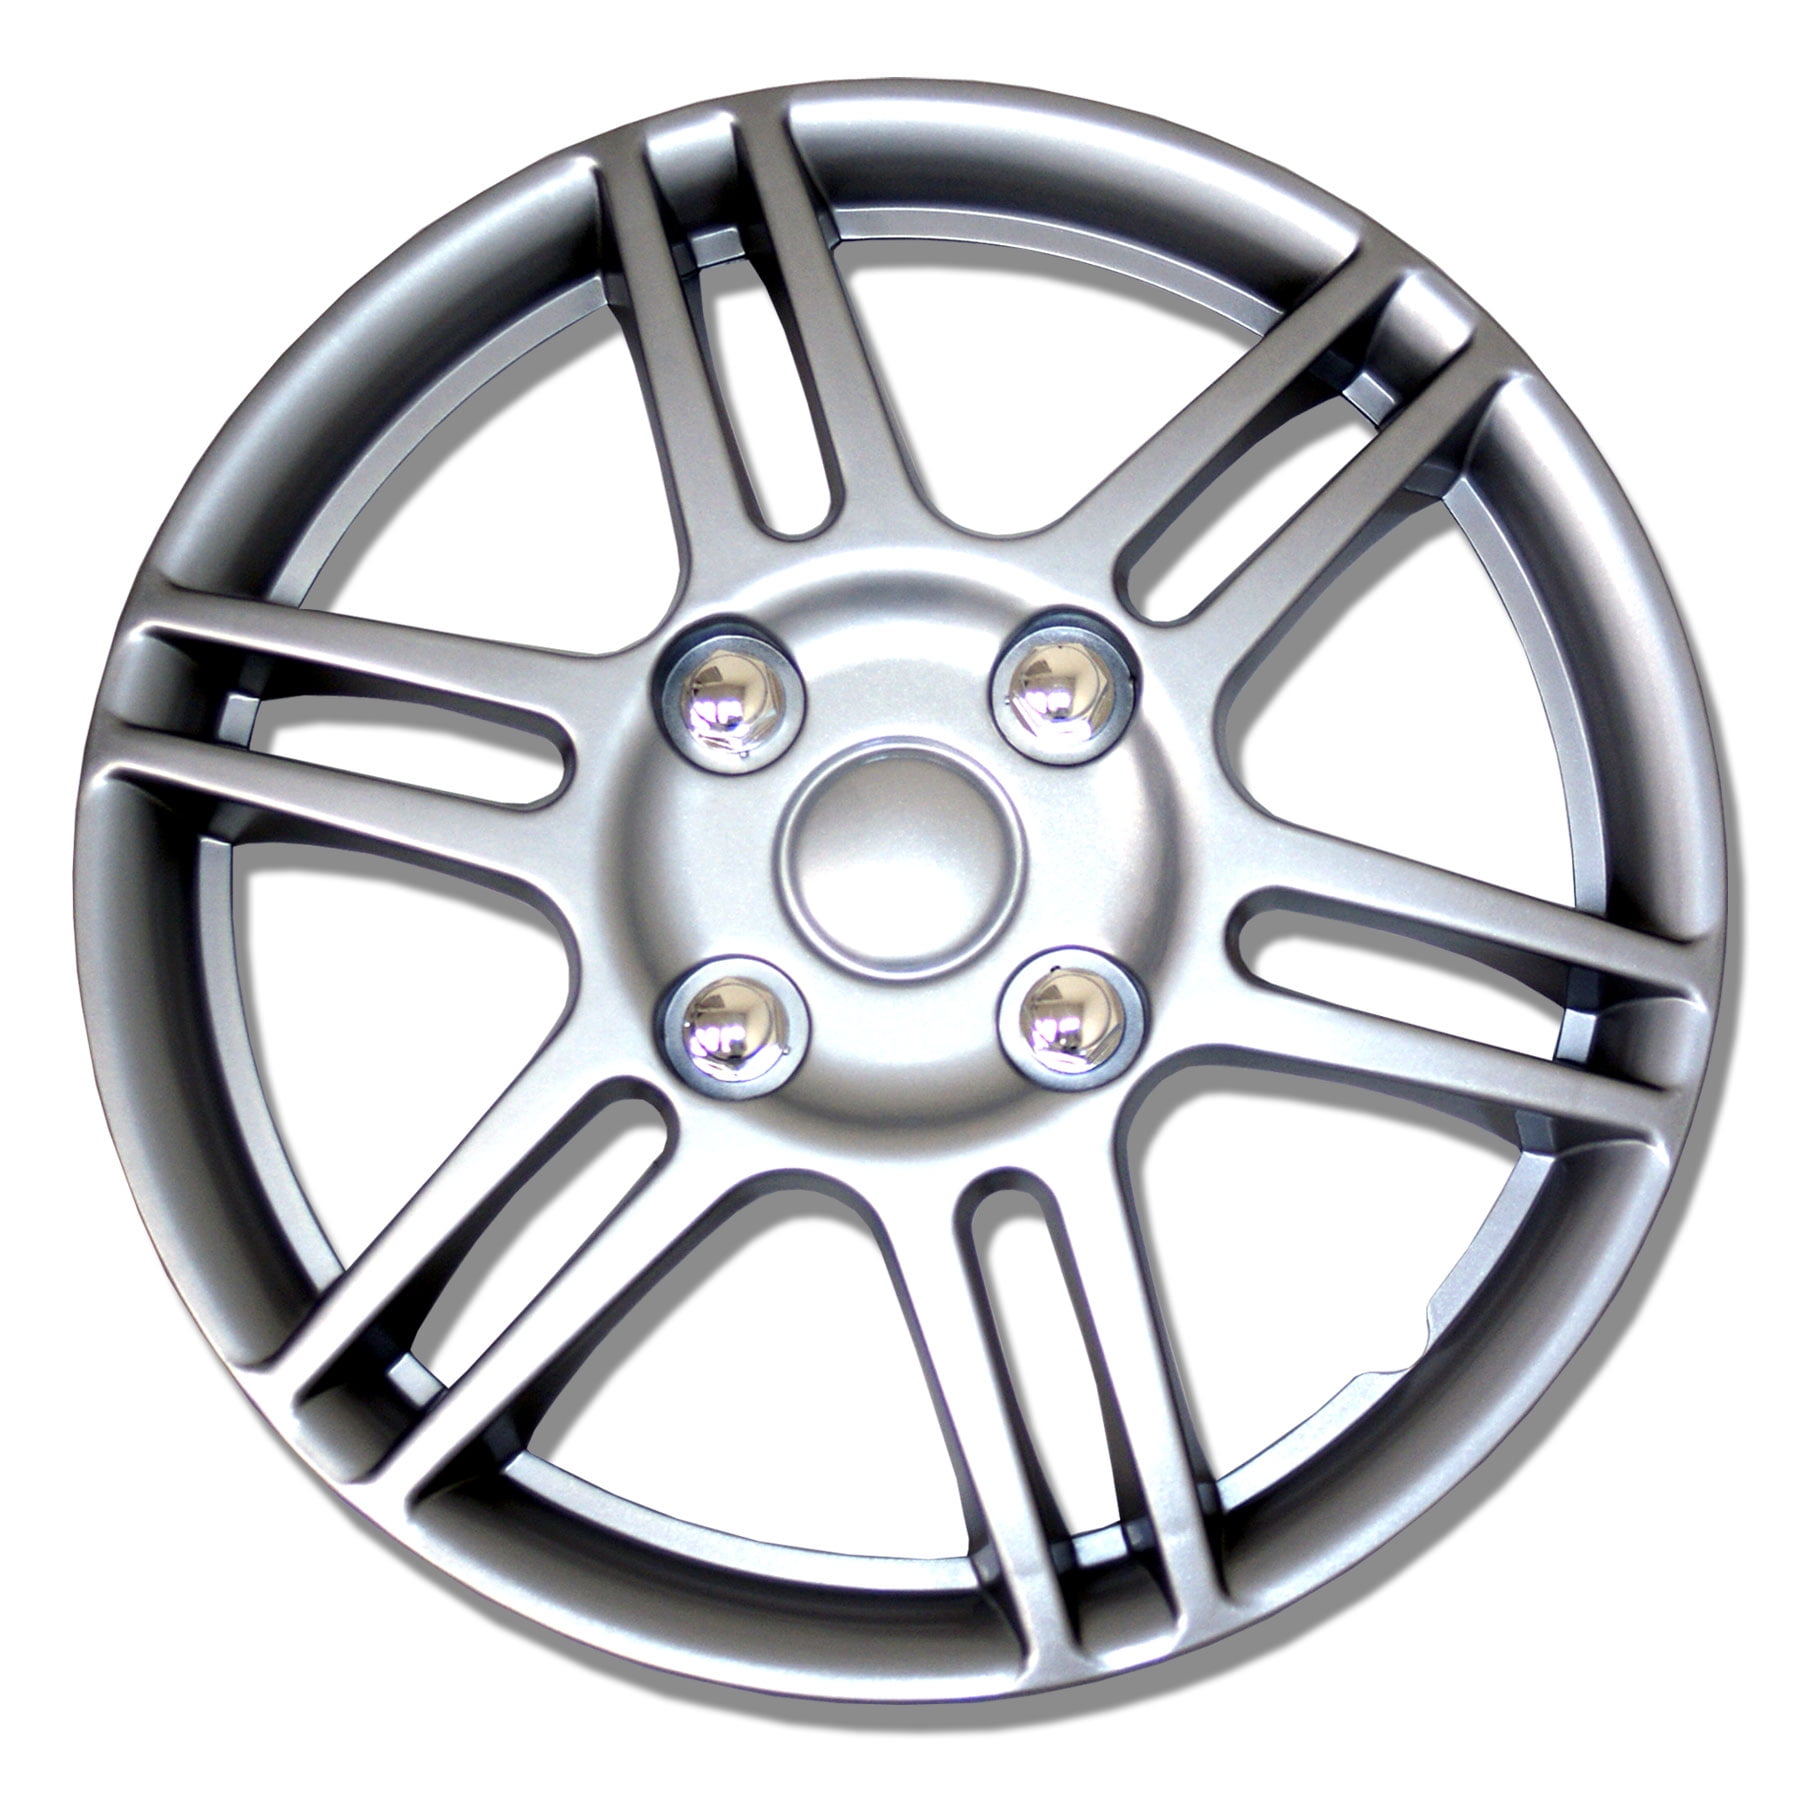 TuningPros WSC-027S14 Hubcaps Wheel Skin Cover 14-Inches Silver Set of 4 